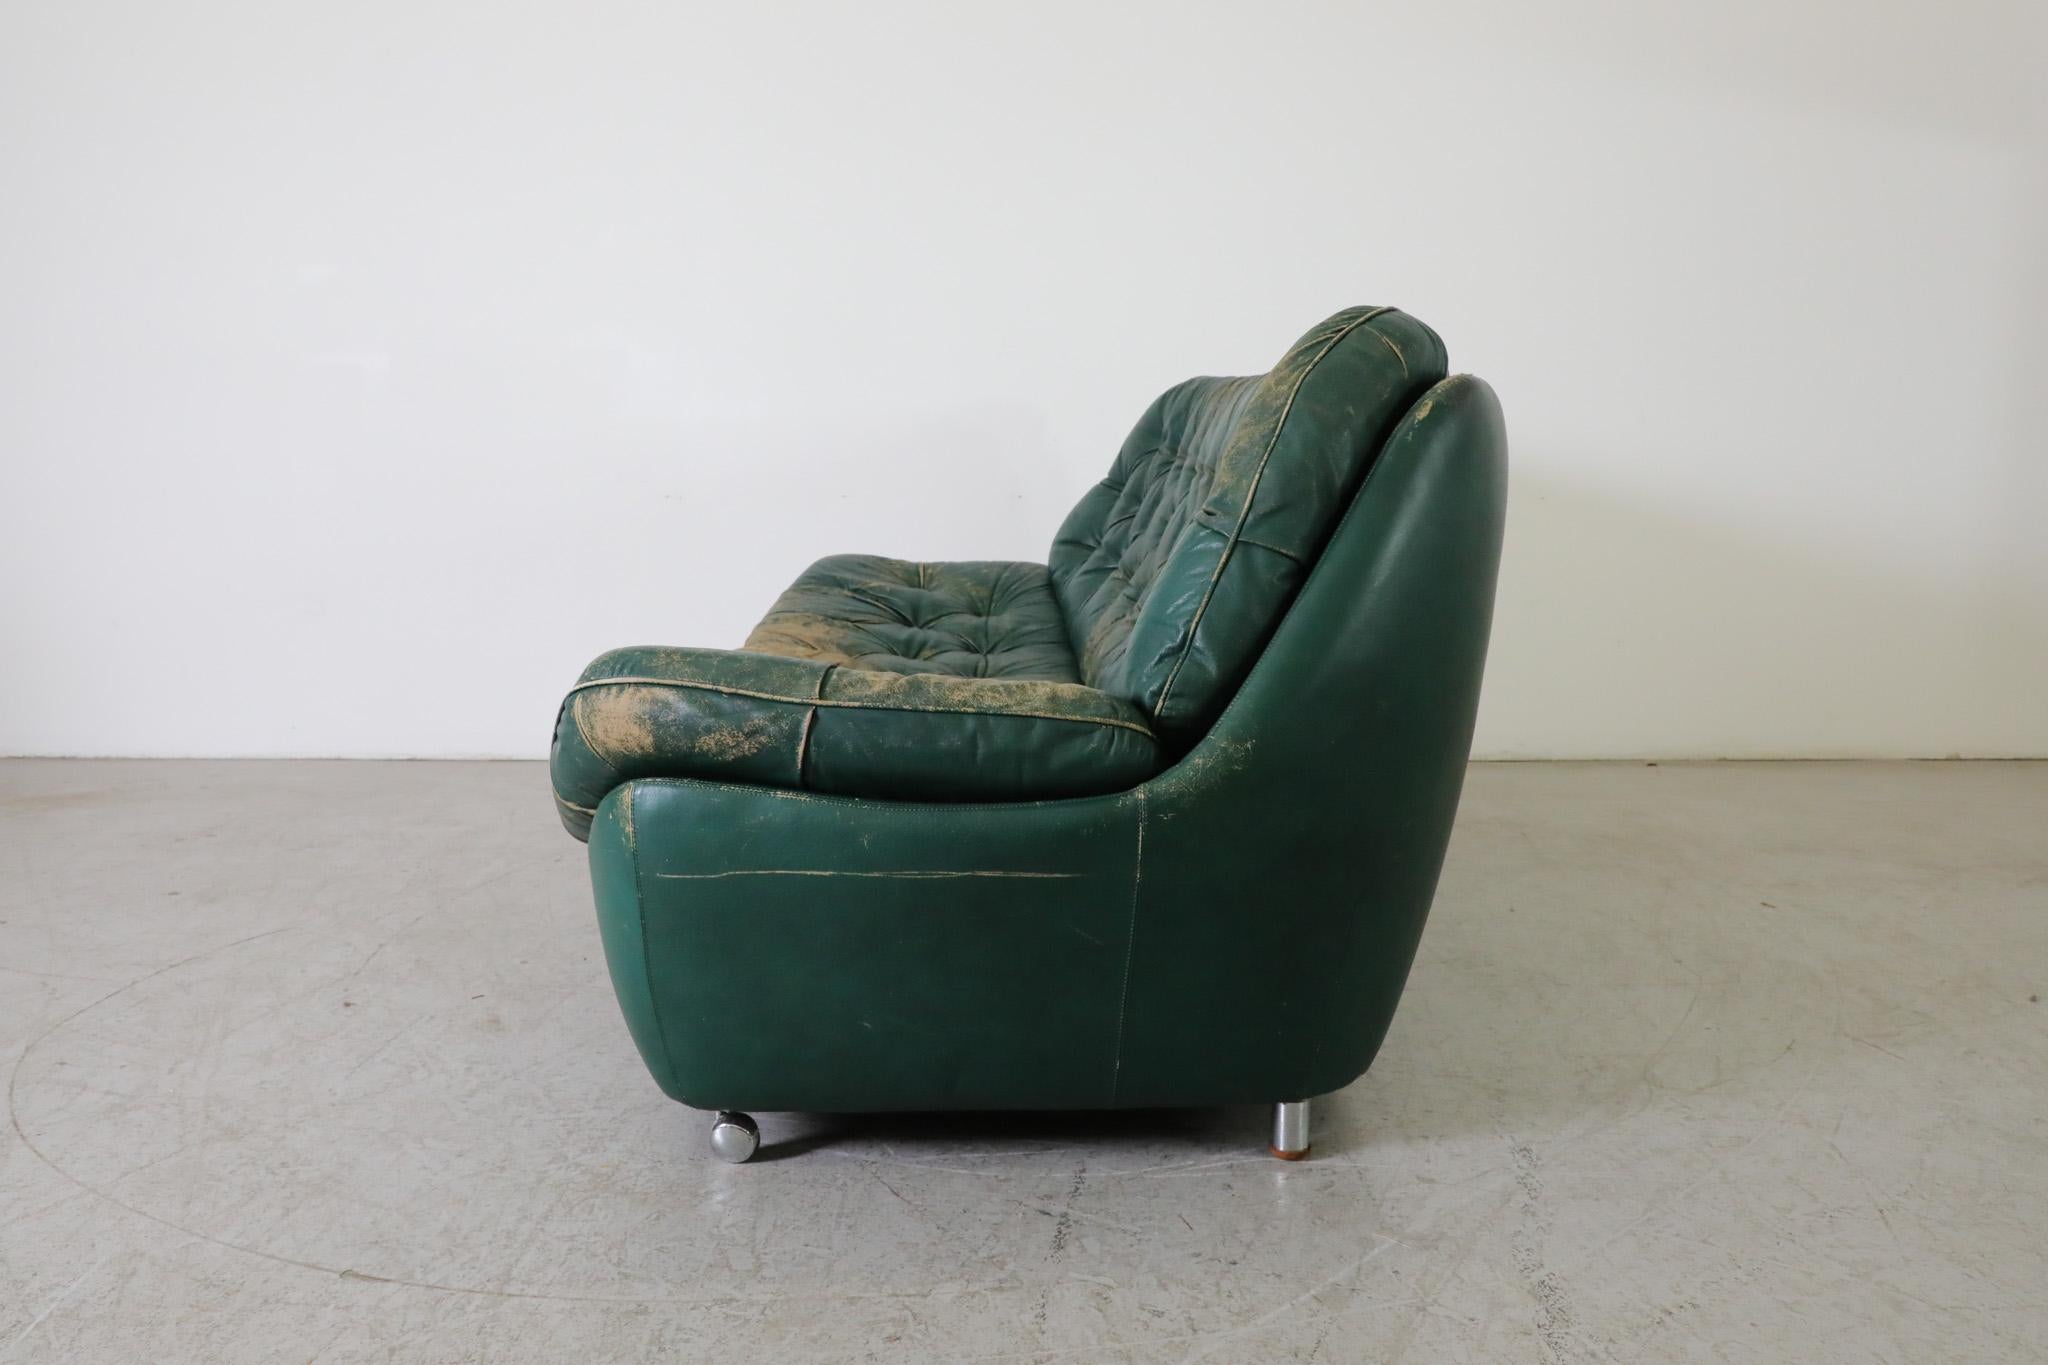 German Chesterfield Style Mid-Century Green Leather Tufted Sofa on Front Wheels For Sale 2